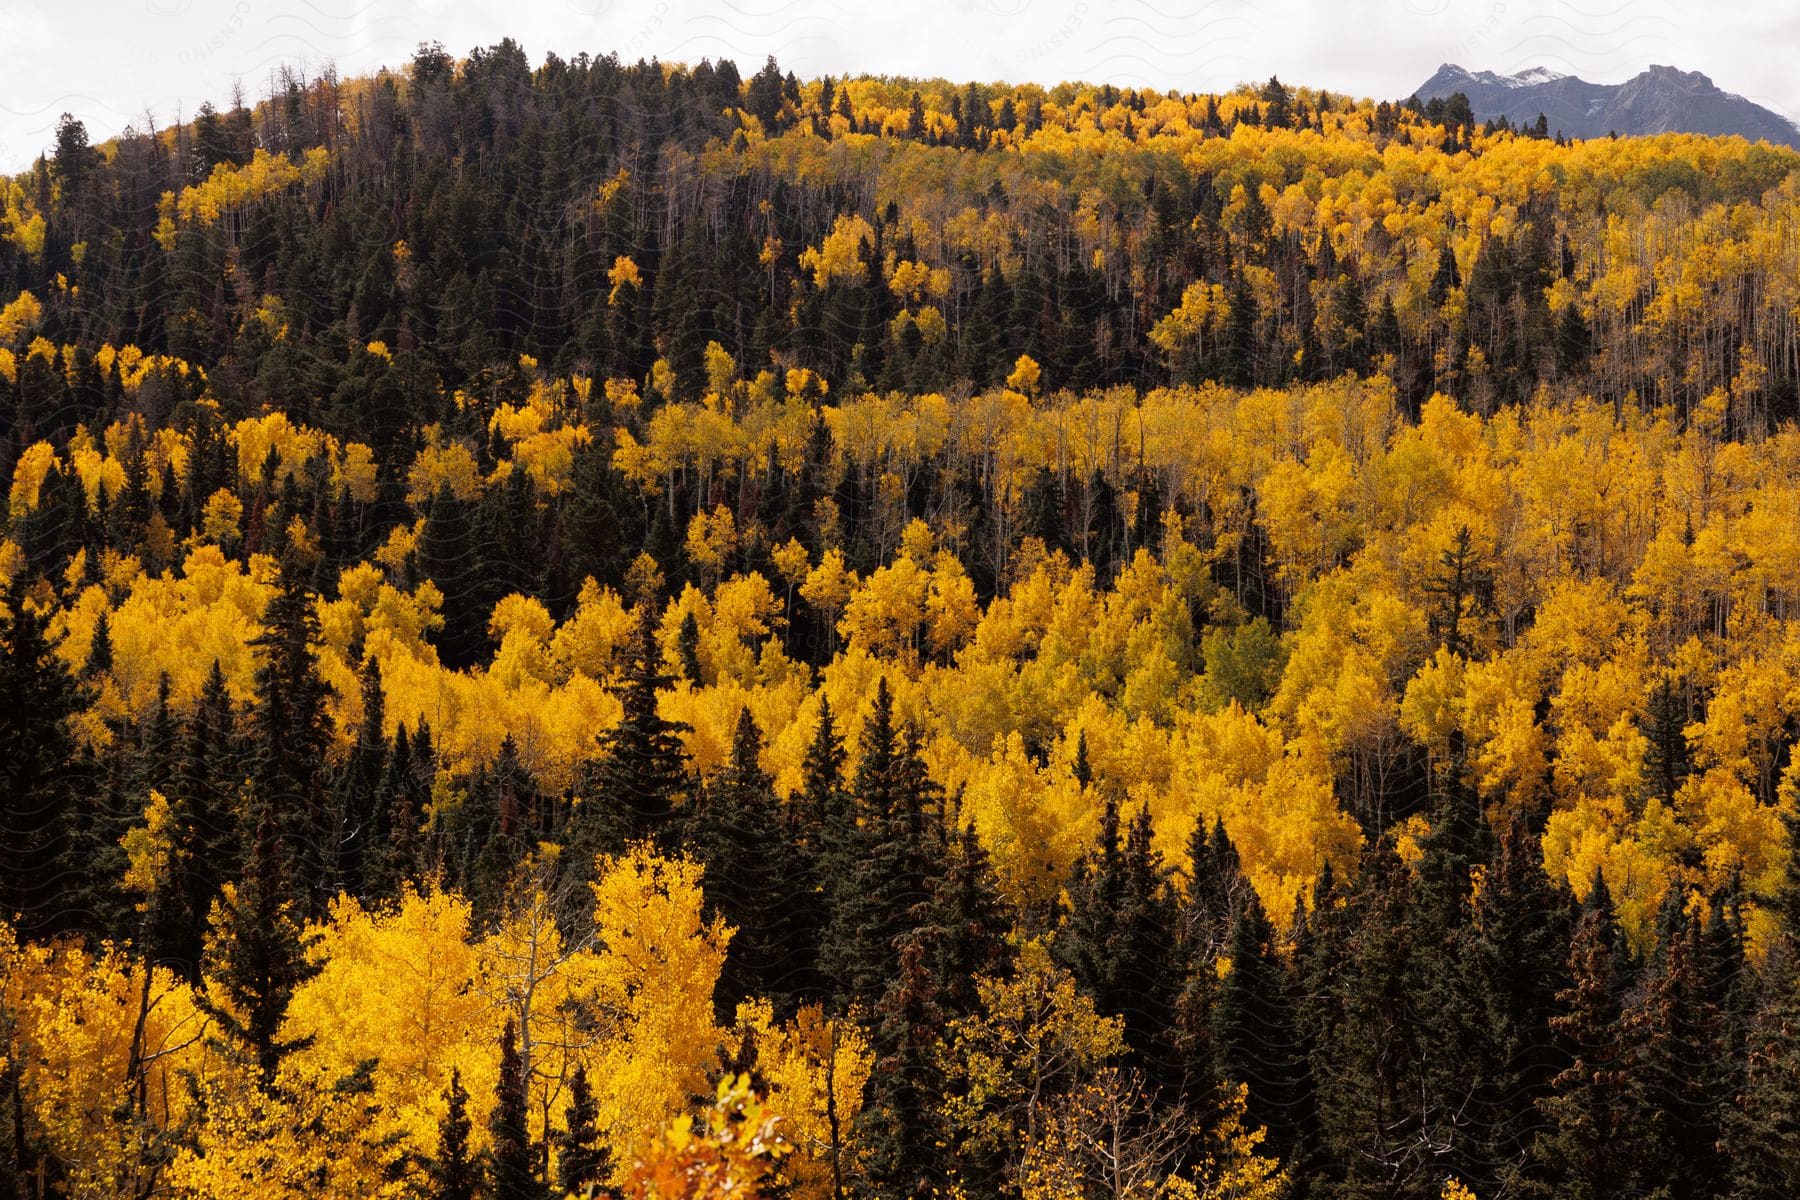 Trees along the side of a forested mountain are changing into fall colors with bright yellow trees standing out